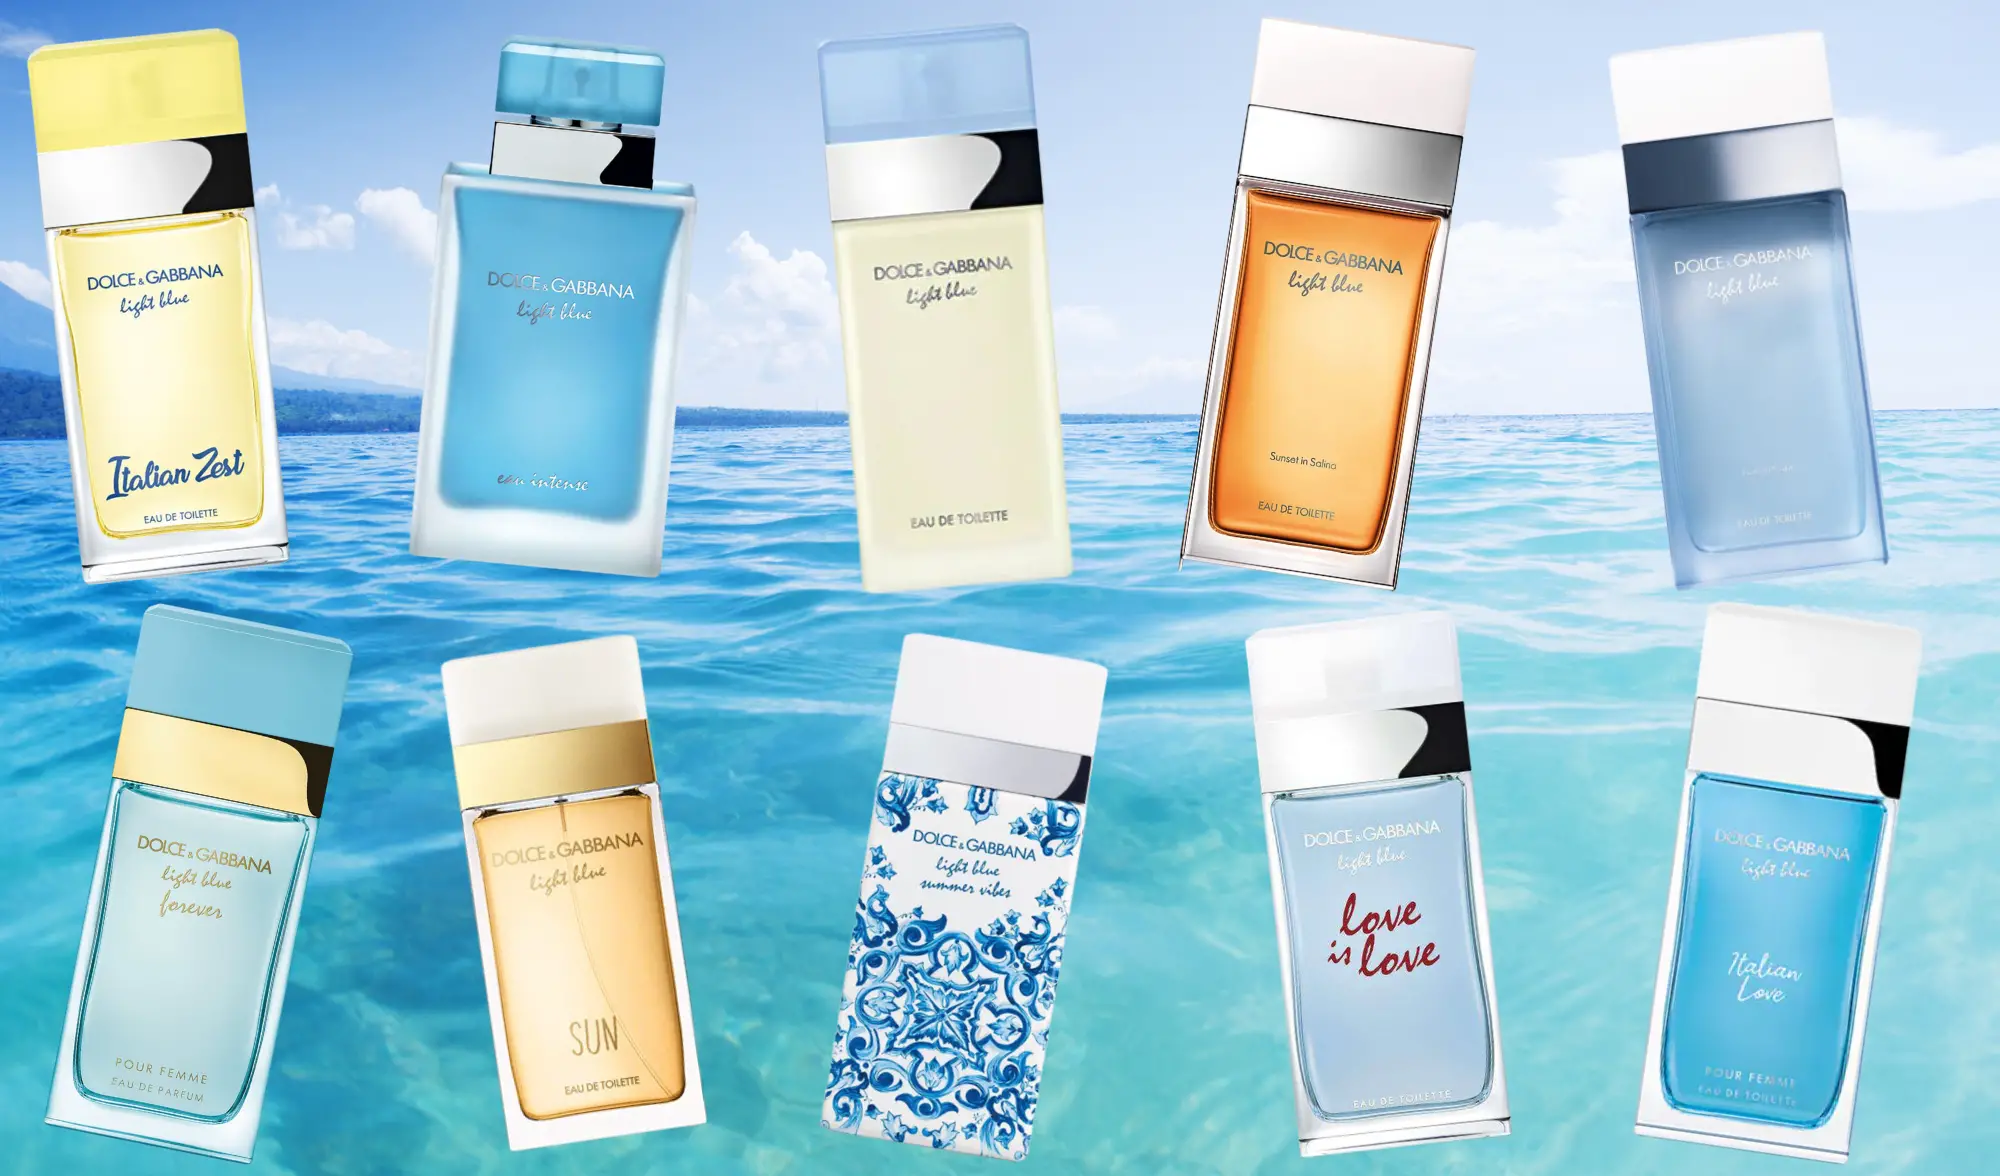 The Ultimate Guide To Every Dolce & Gabbana Light Blue Perfume